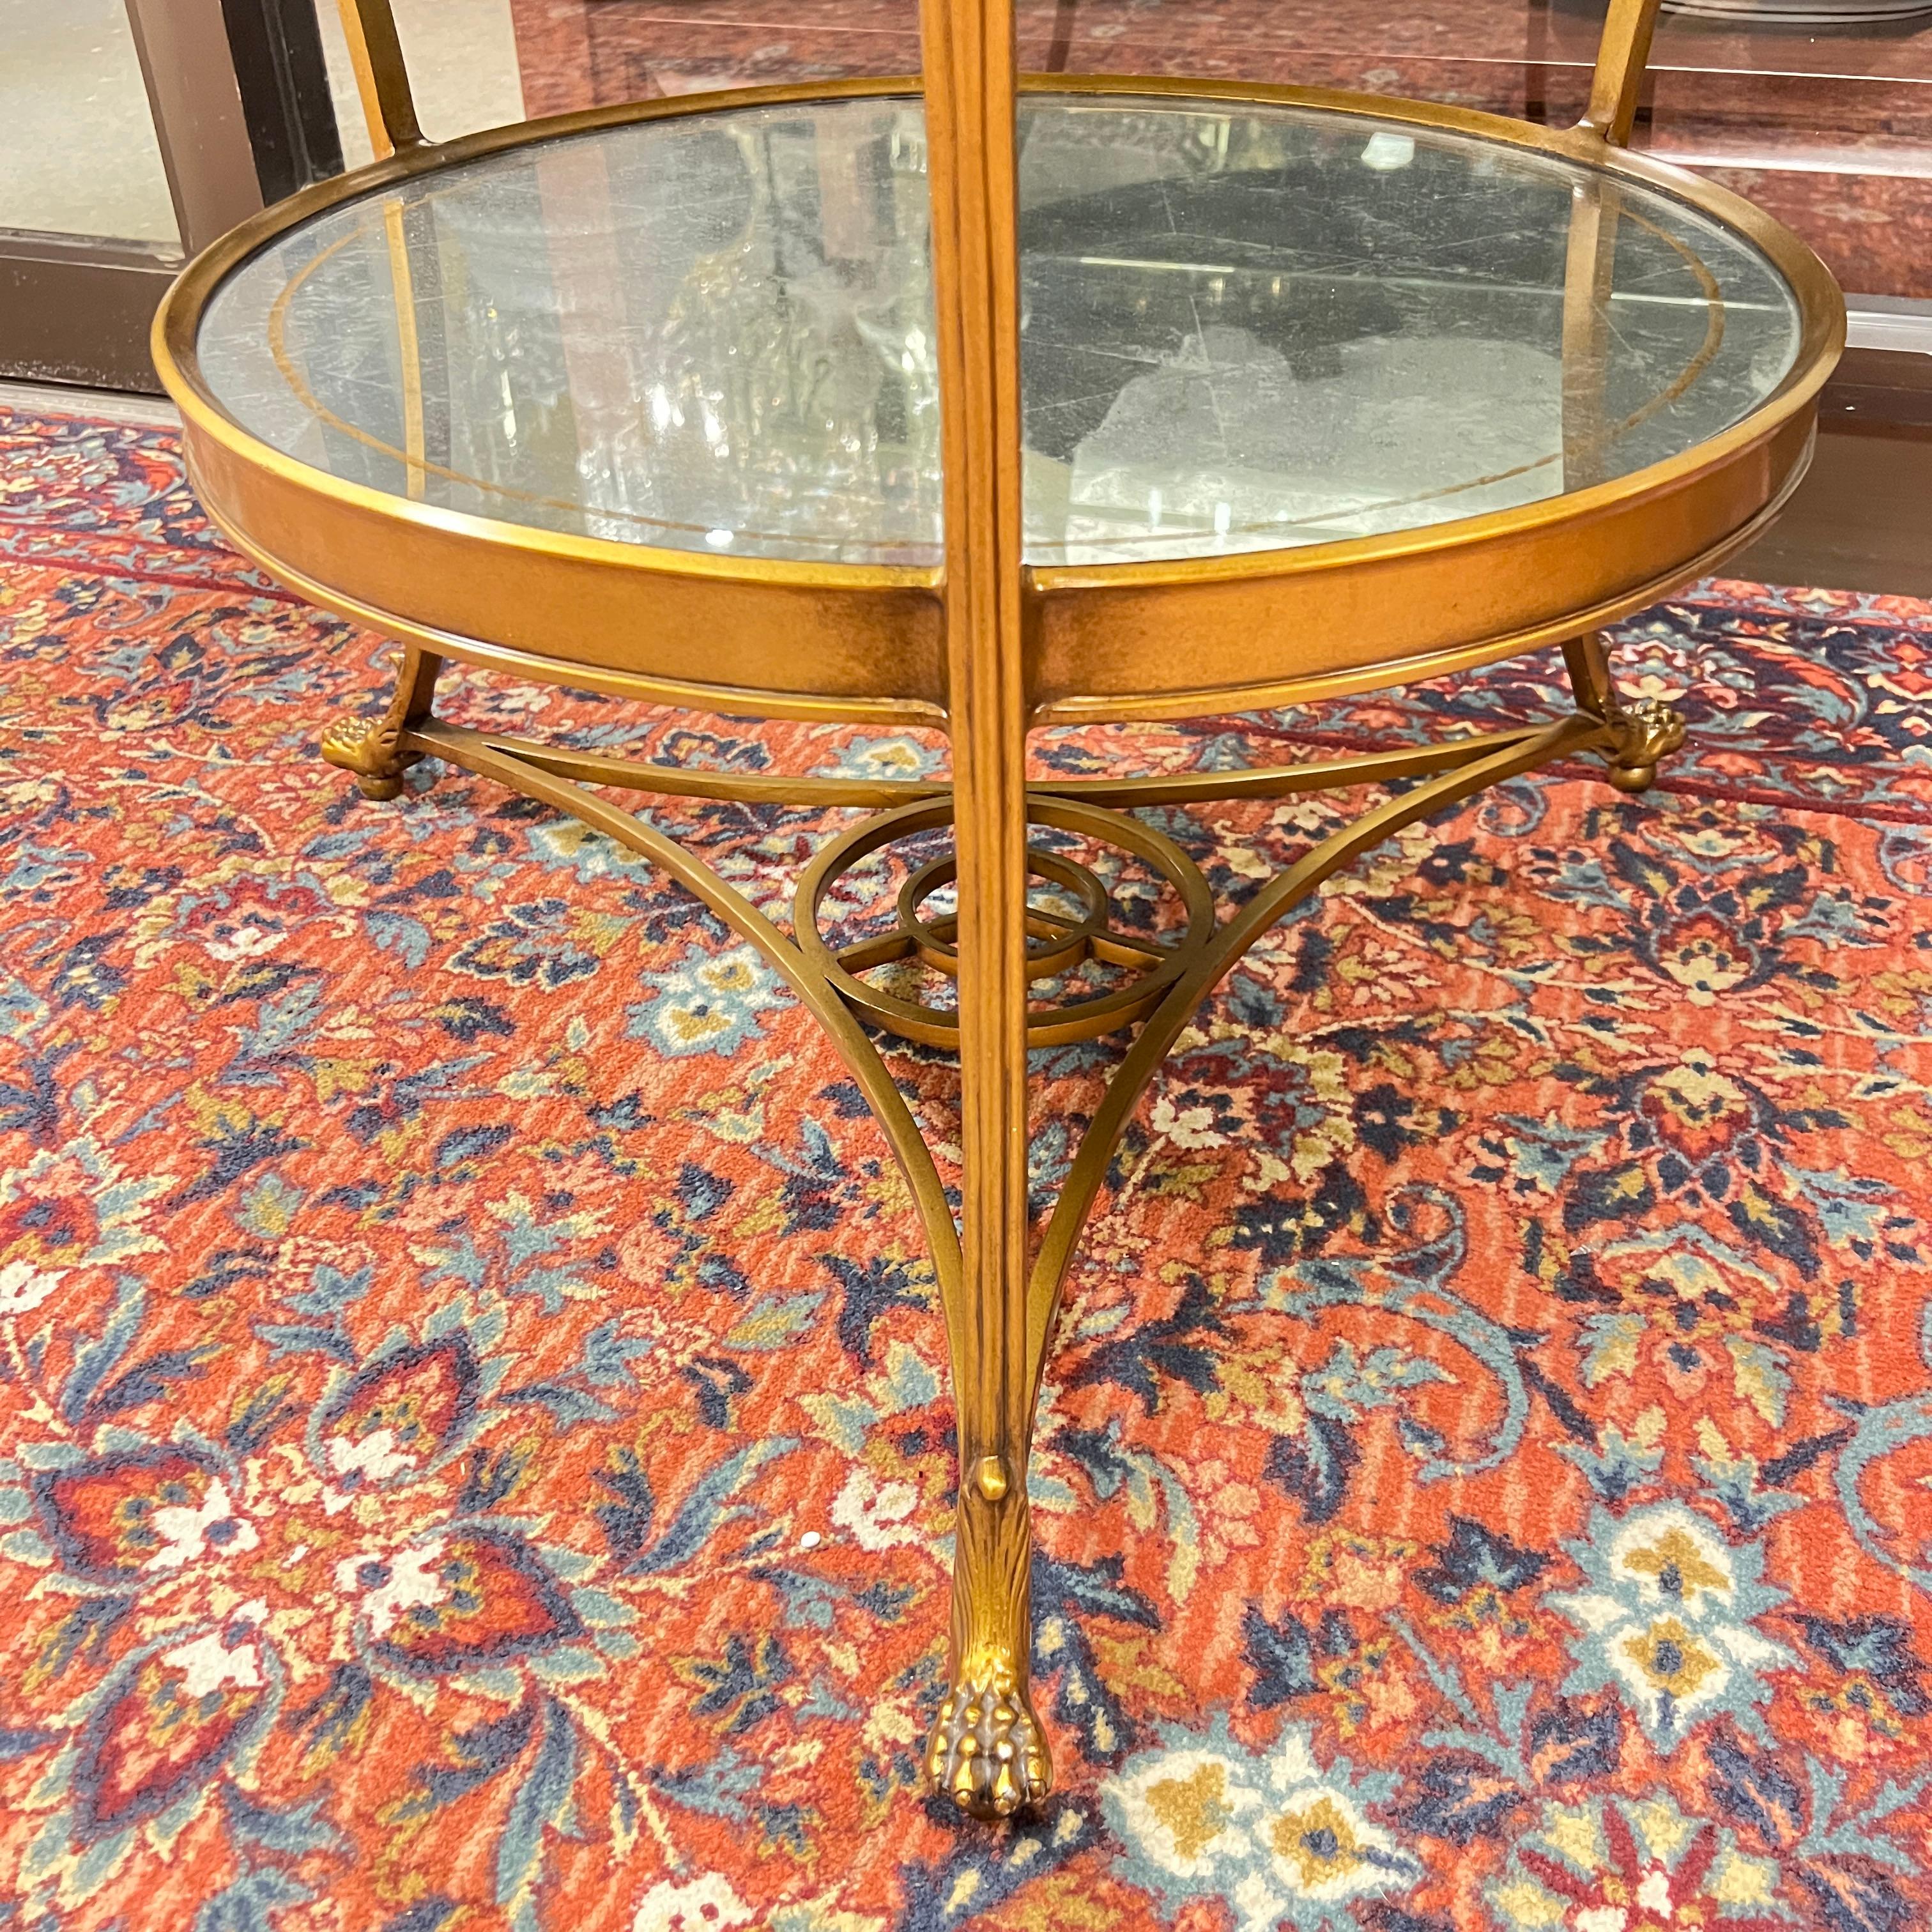 Vintage Circular Gilt Bronze Center Table with Etched Mirrored Glass Top 1